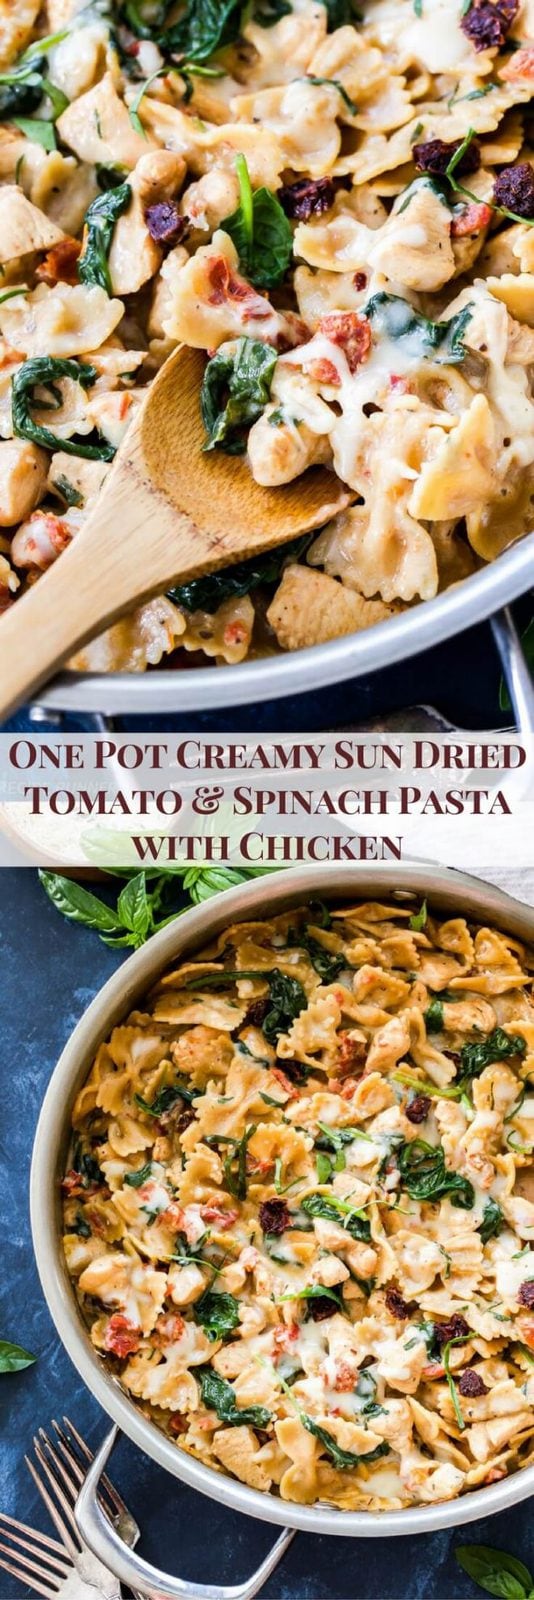 One Pot Creamy Sun Dried Tomato and Spinach Pasta with Chicken is an easy to make dinner the whole family will love! You won't believe there isn't a drop of cream in this flavorful, healthy pasta dish!